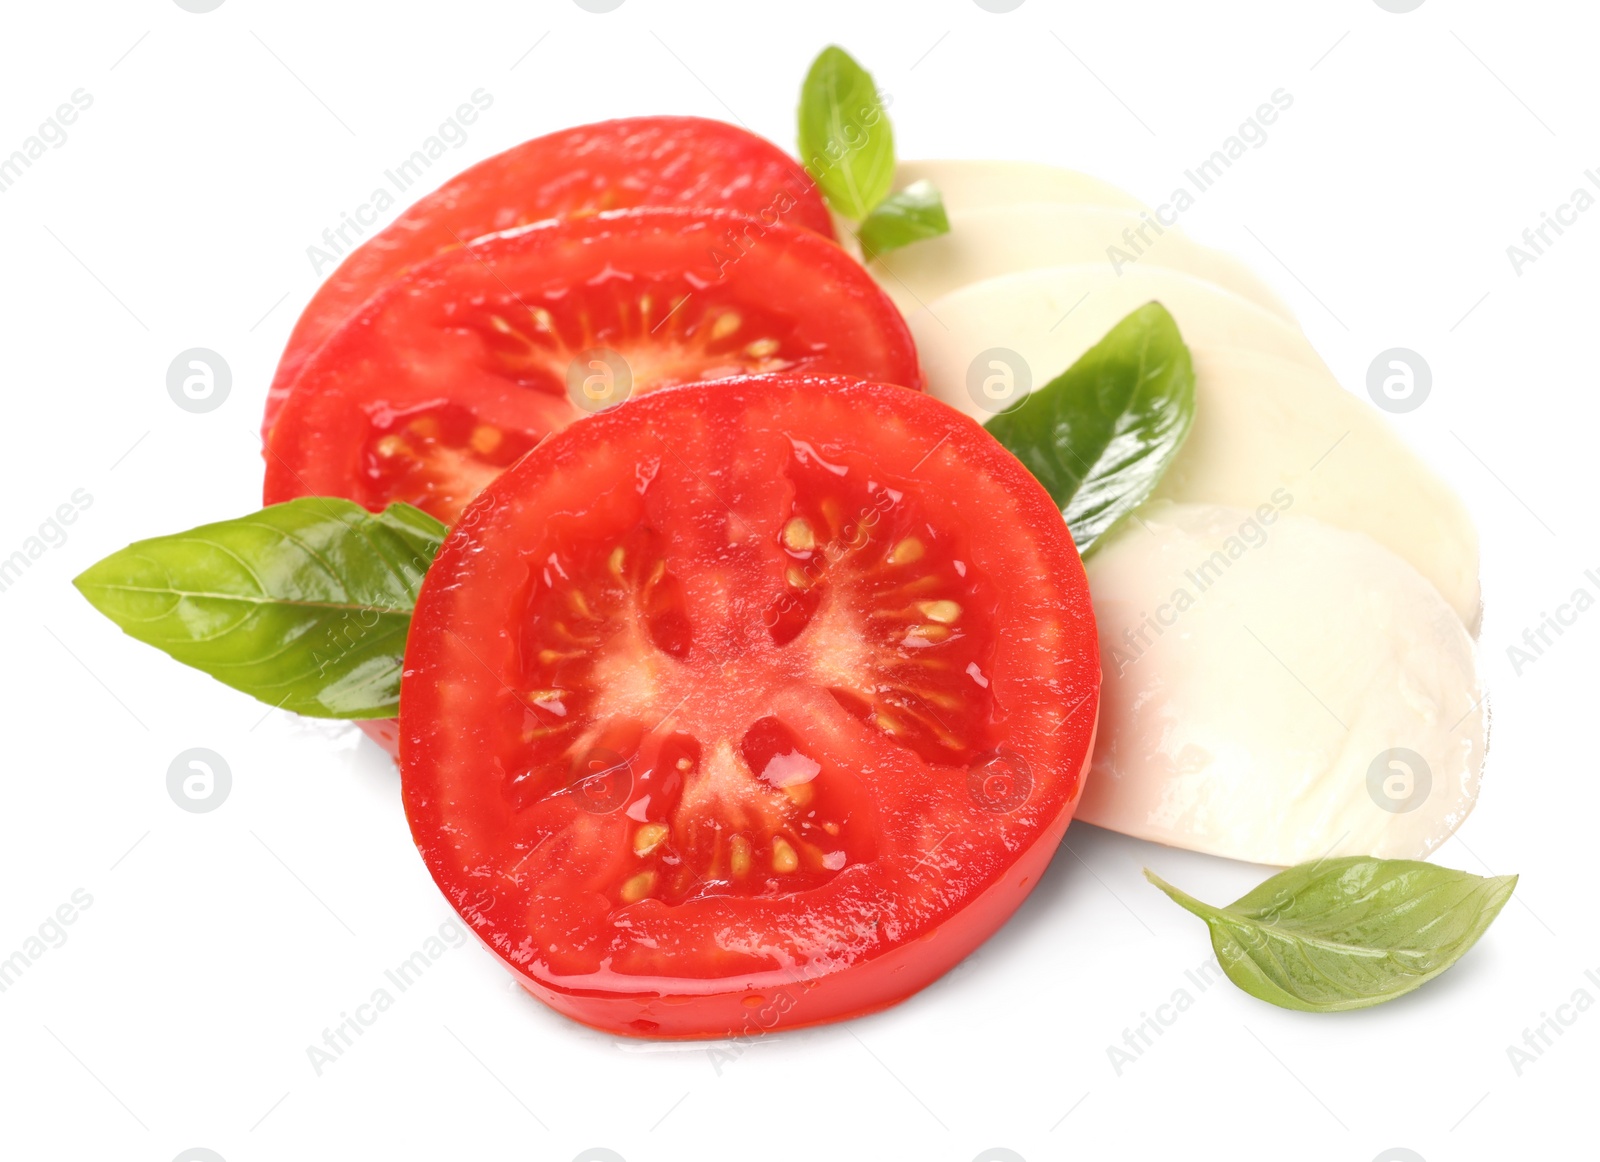 Photo of Delicious Caprese salad with tomatoes, mozzarella cheese and basil leaves isolated on white